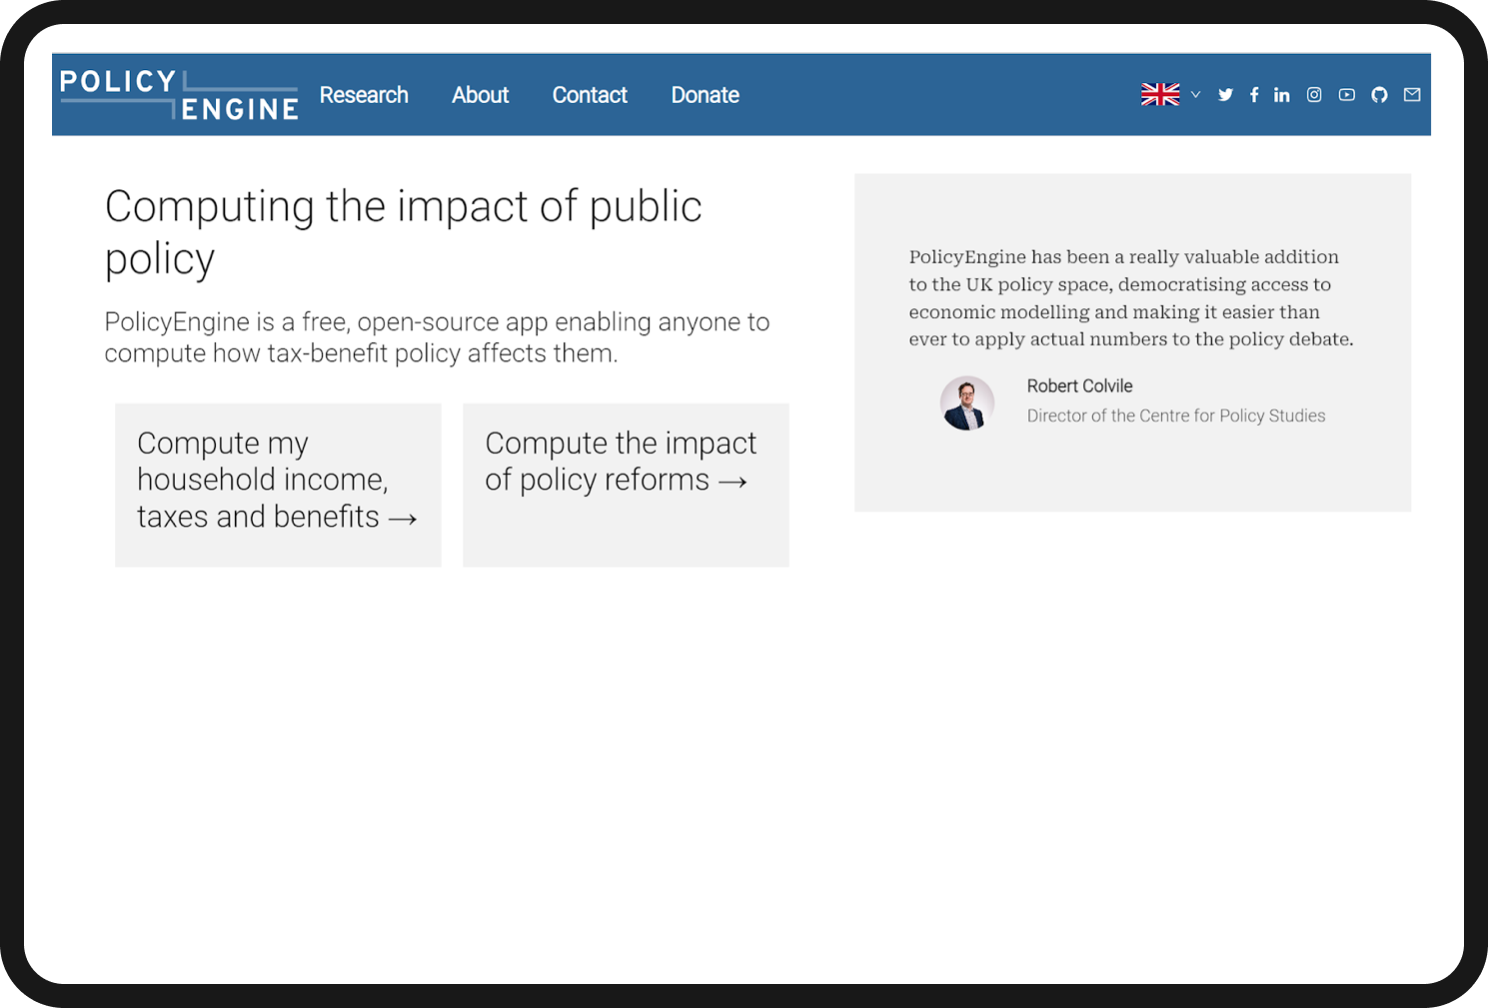 PolicyEngine - Computing the impact of public policy